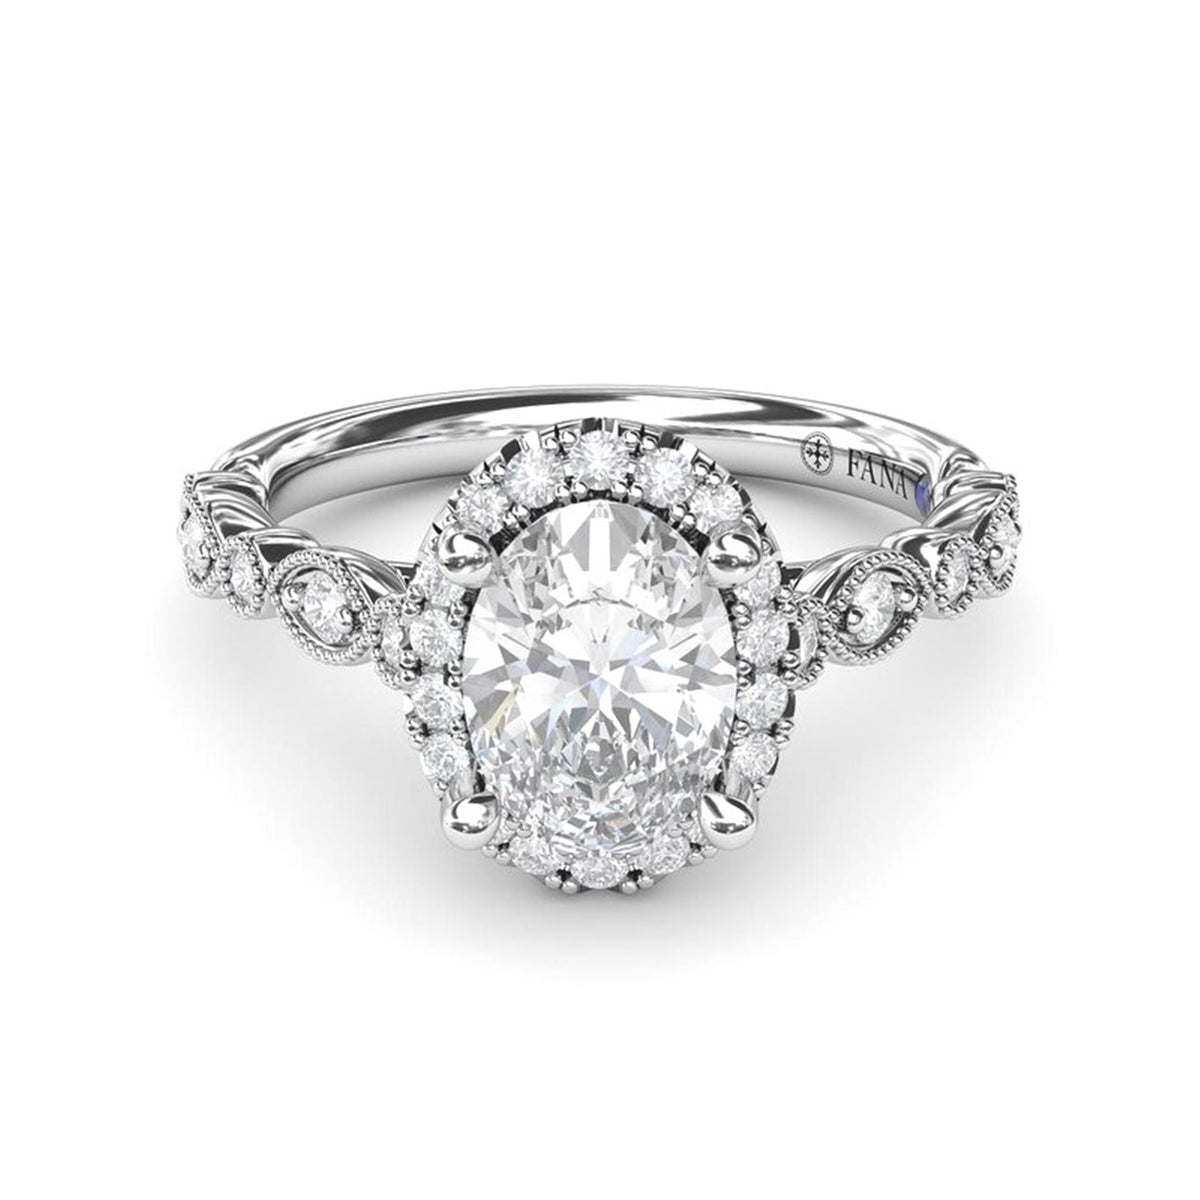 14Kt White Gold Halo Engagement Ring Mounting With 0.29cttw Natural Diamonds